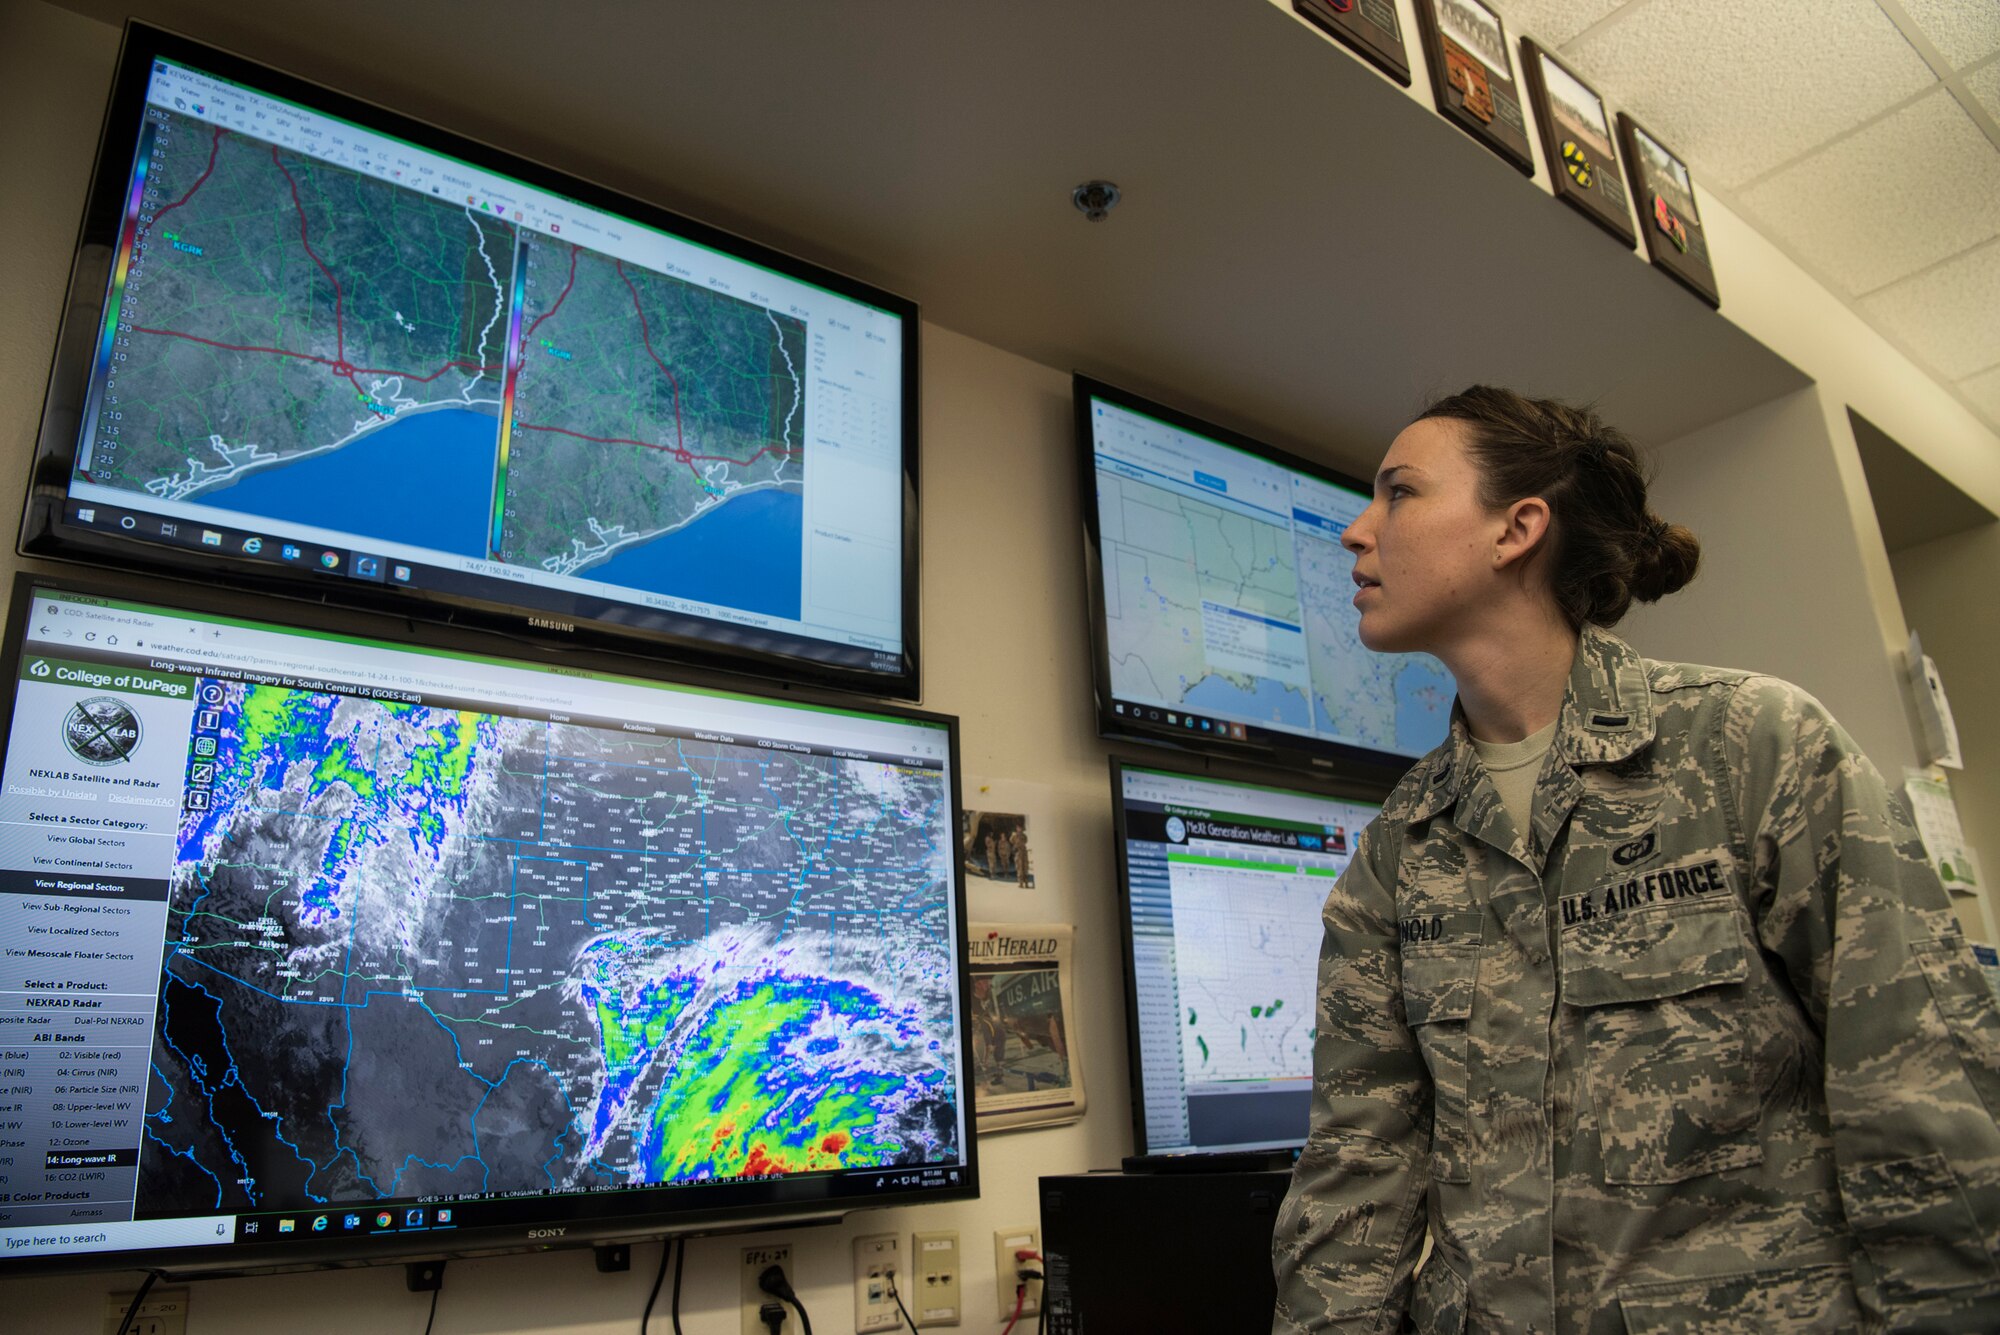 1st Lt. Veronica Arnold, 47th Operations Support Squadron weather flight commander, studies a weather model for the local area at Laughlin Air Force Base, Texas, Oct. 17, 2019. Arnold was chosen by wing leadership to be the "XLer of the Week" of Oct. 7, 2019. (U.S. Air Force photo by Senior Airman Marco A. Gomez)